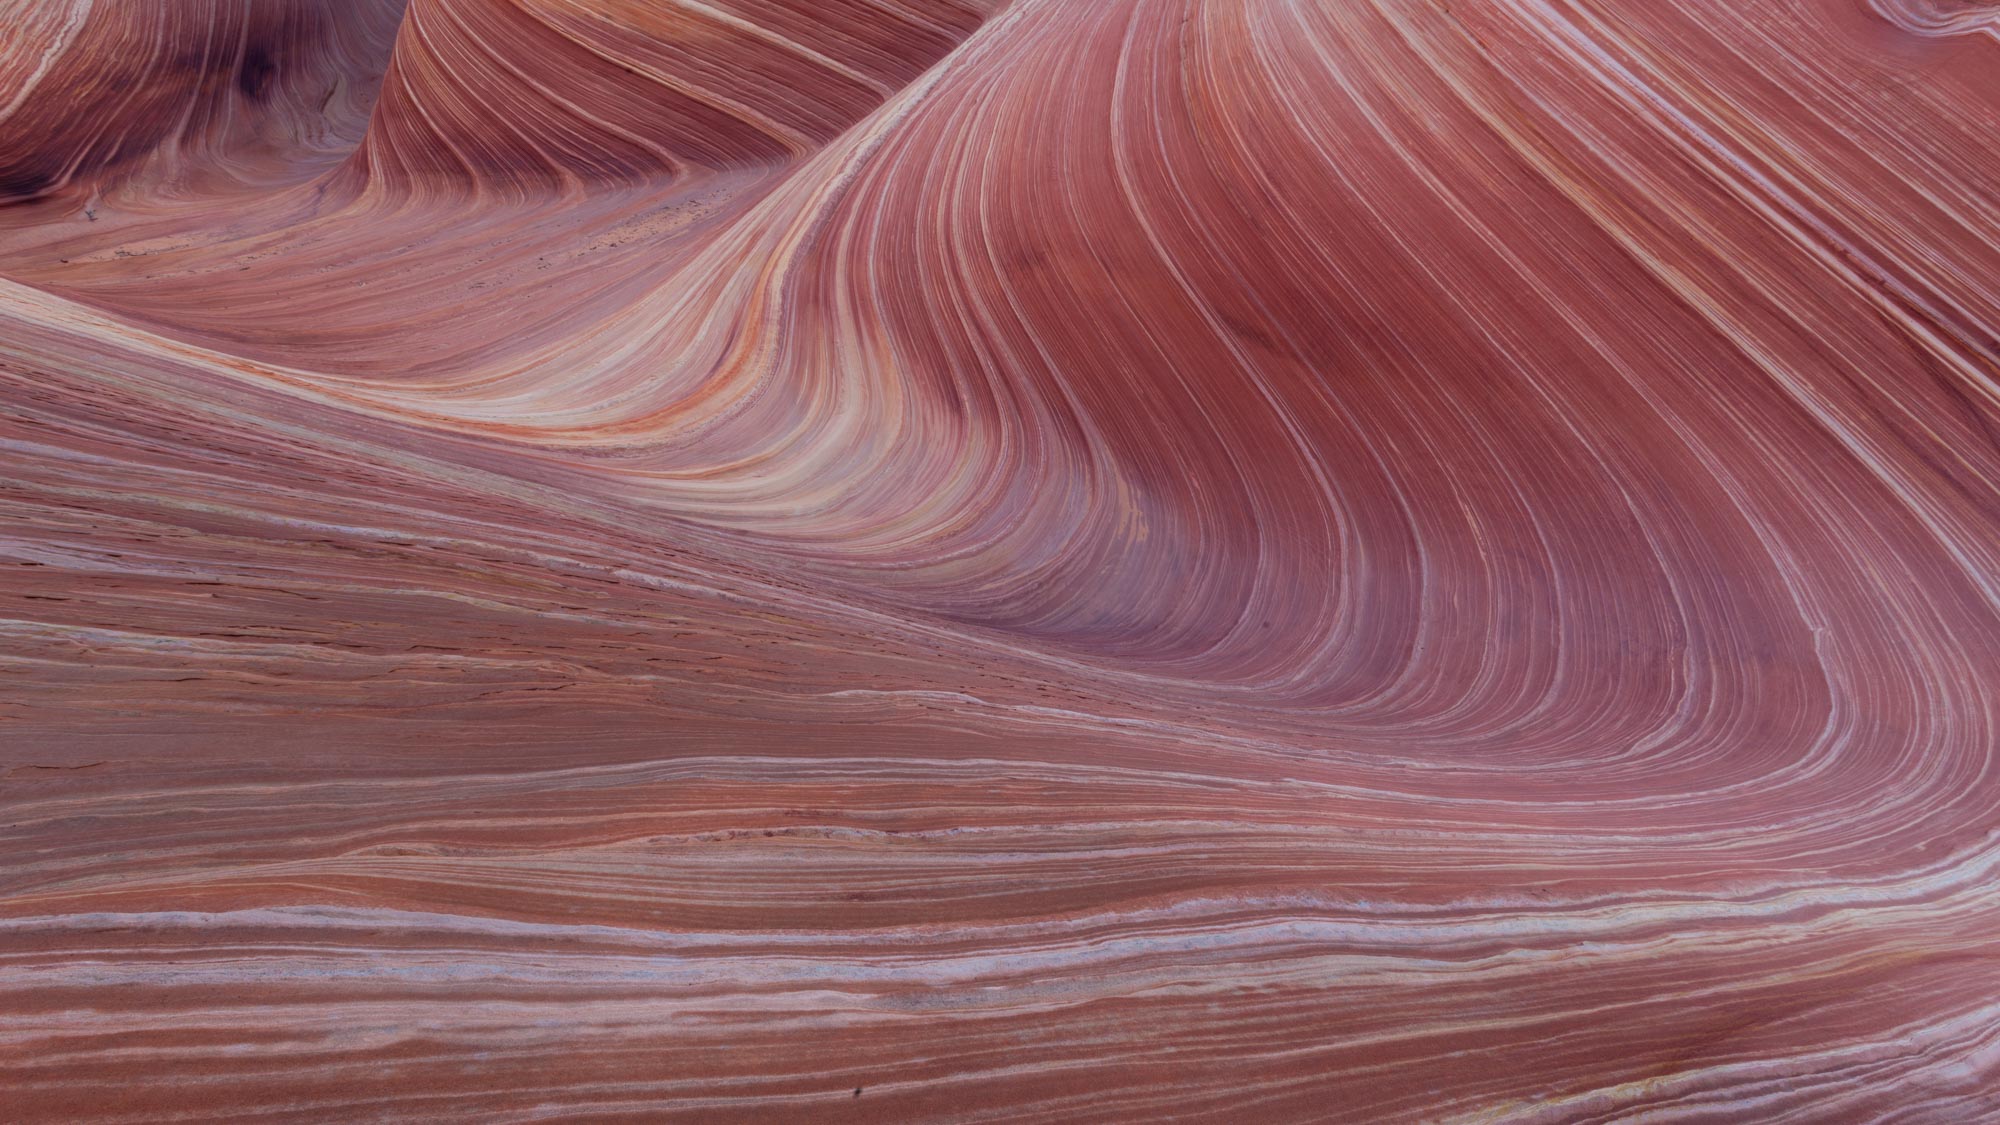 Early morning image of the iconic location in northern Utah known as "The Wave"